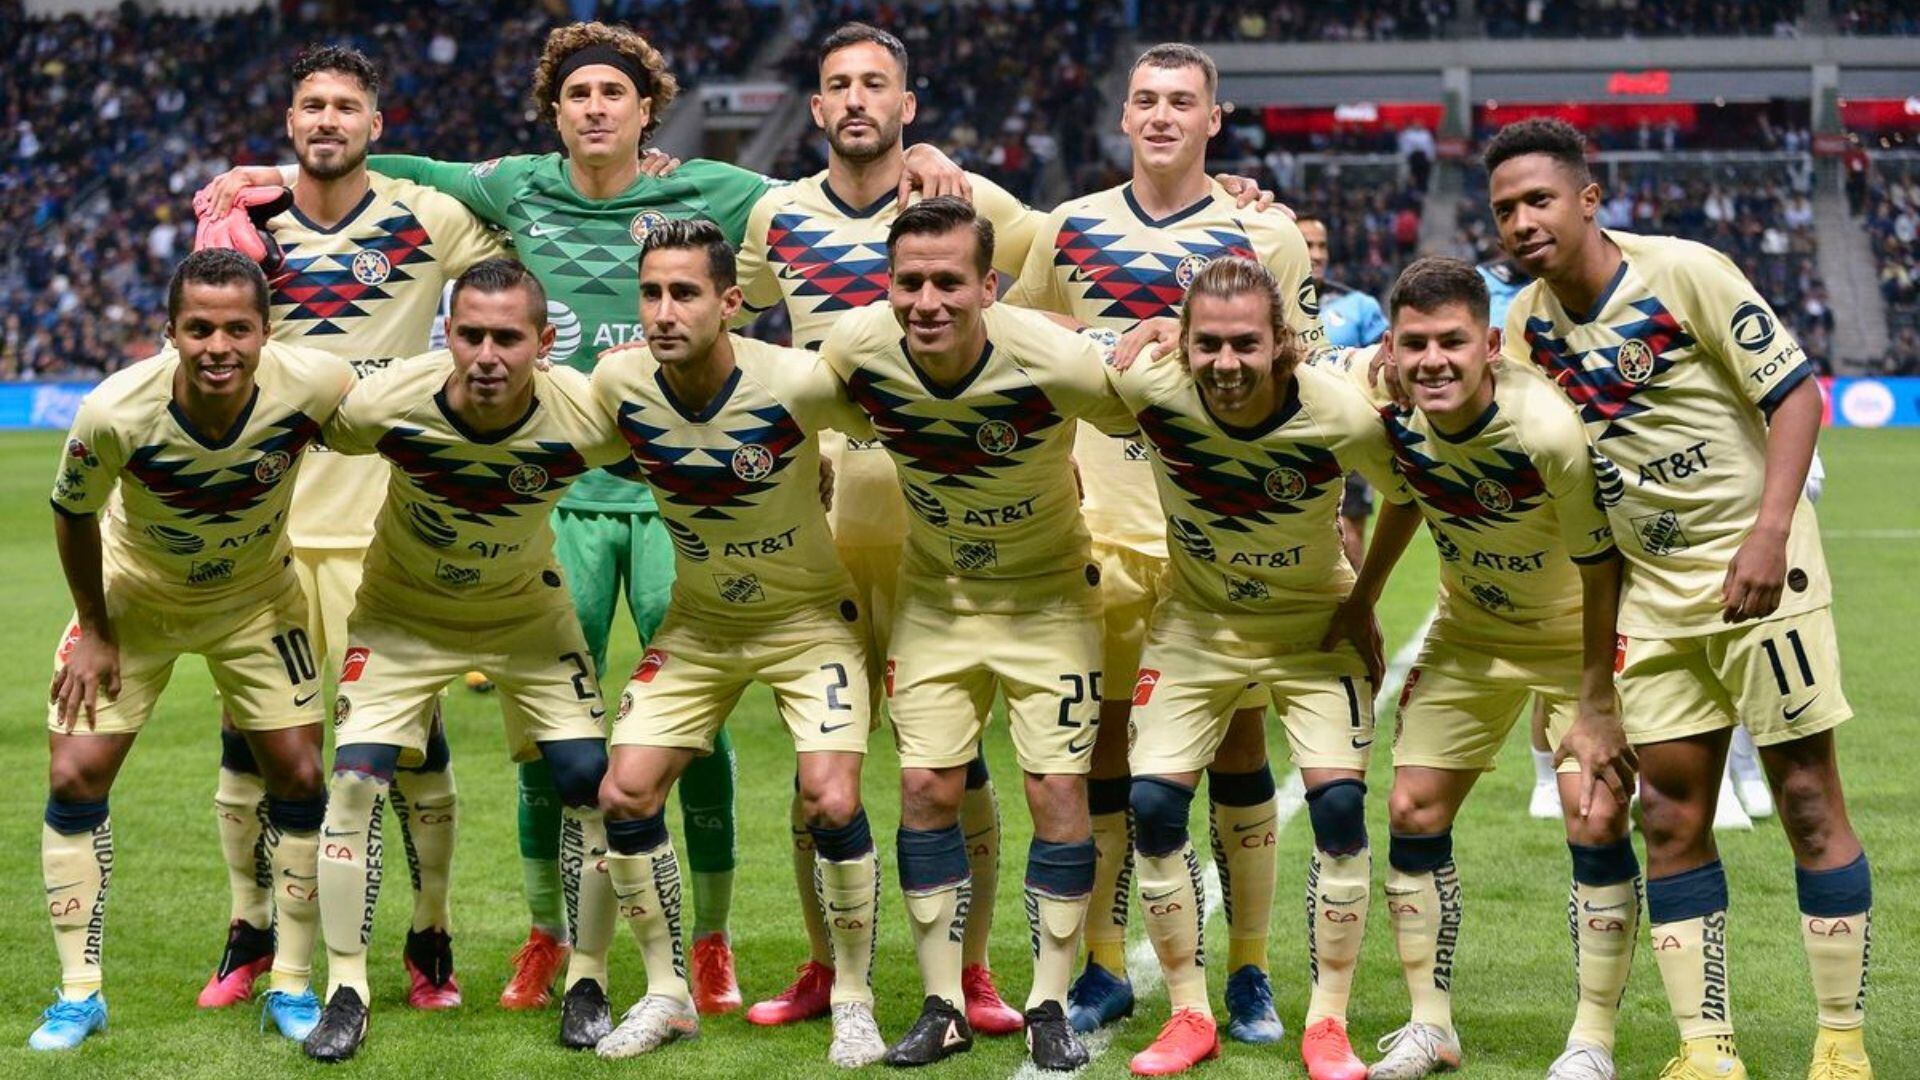 The players that Fernando Ortíz doesn’t want in Club América